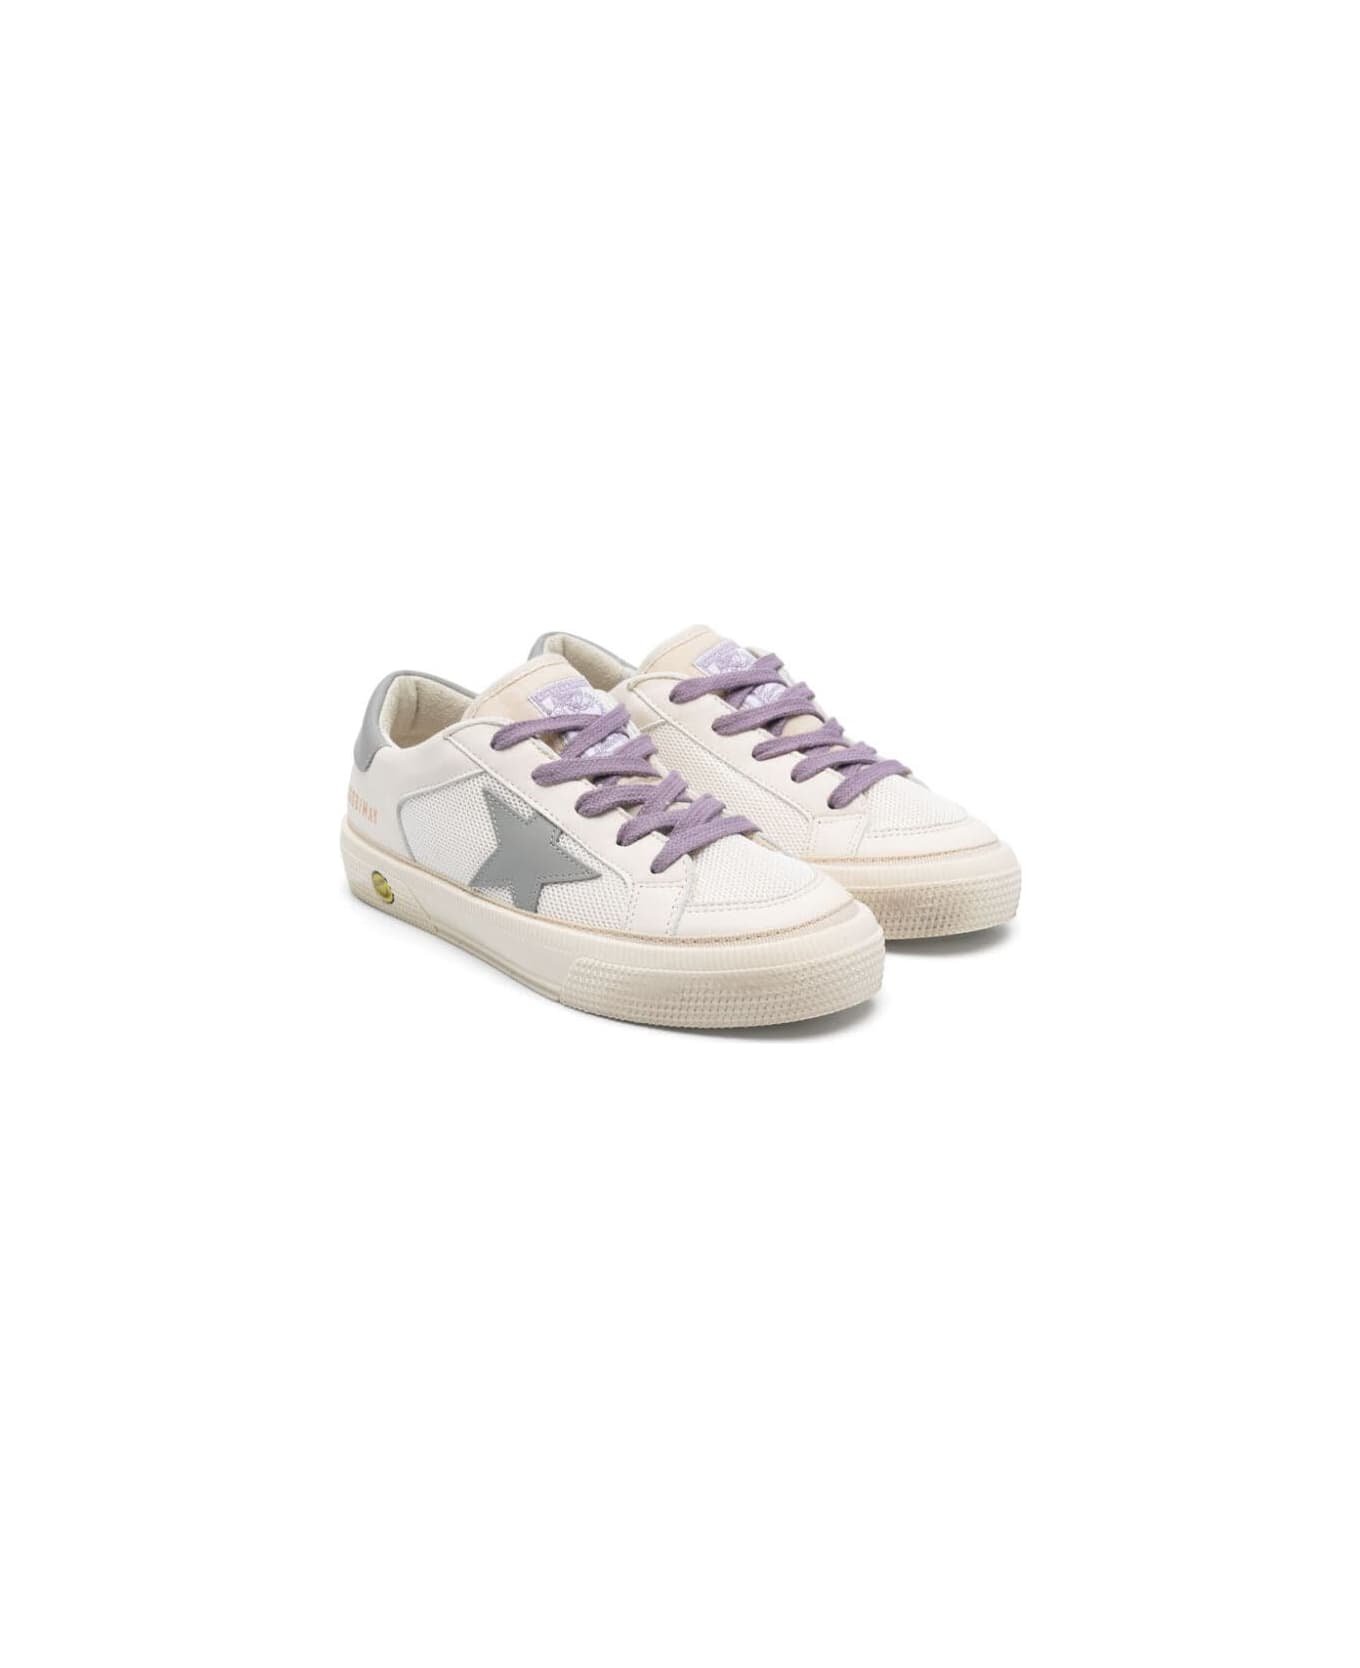 Golden Goose May Nappa And Net Upper Leather Star And Heel Nylo Tongue - White Grey シューズ